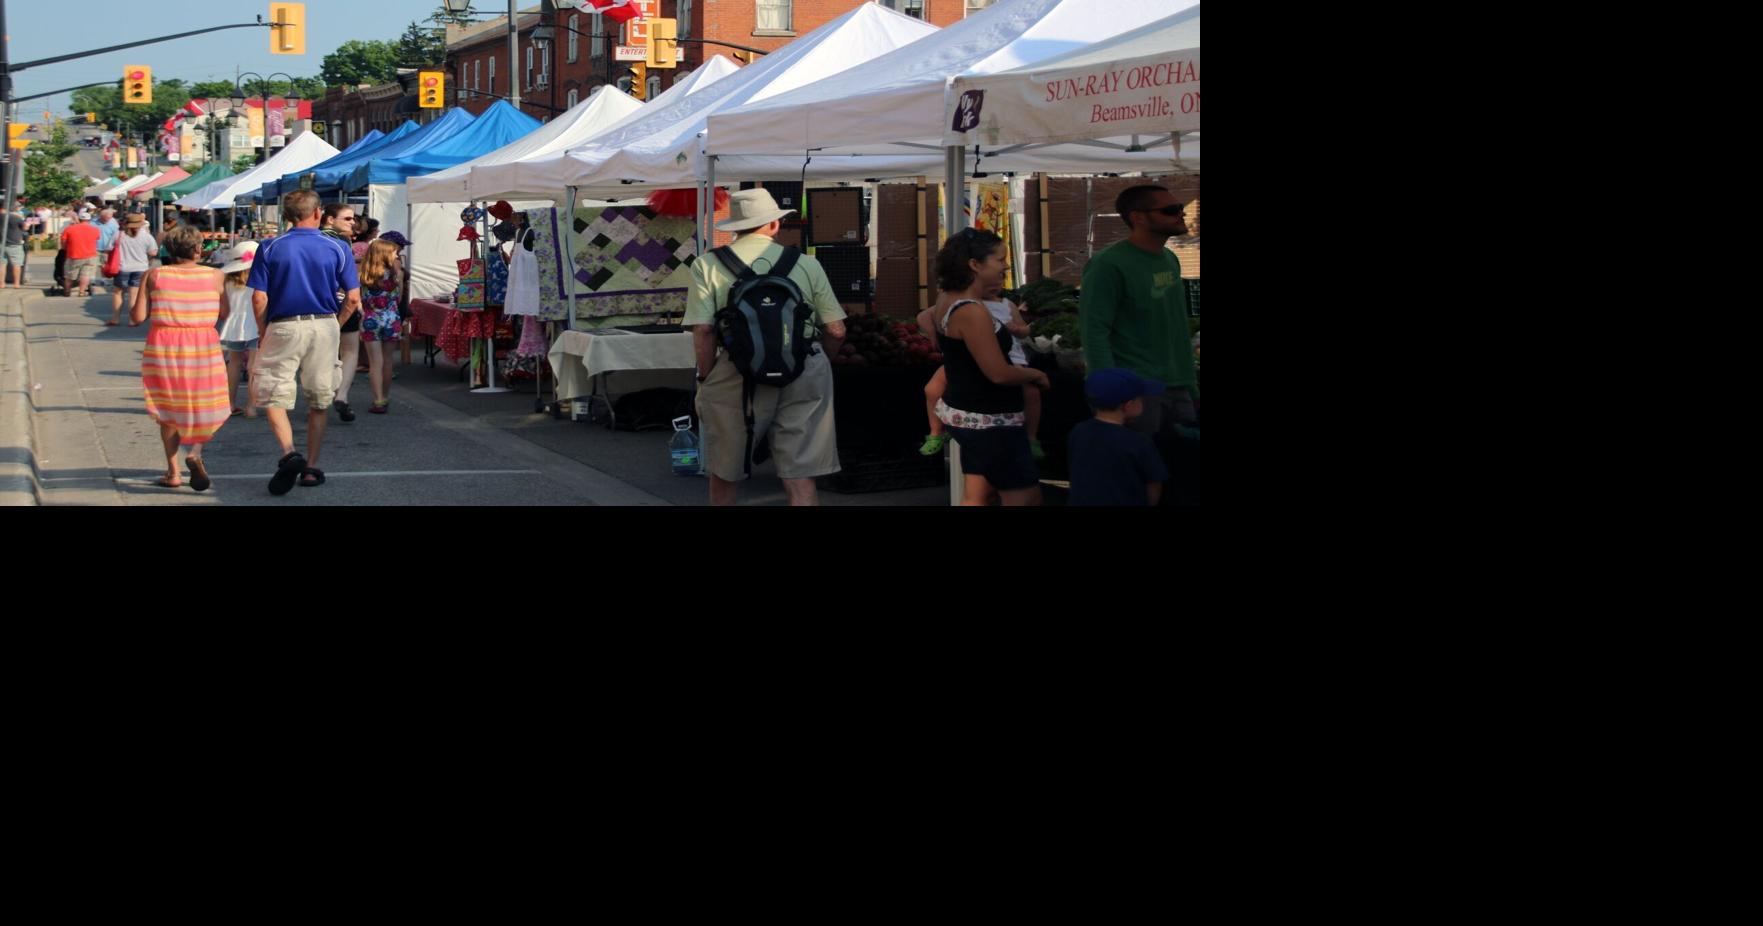 Downtown Farmers Market to open with new COVID19 safety